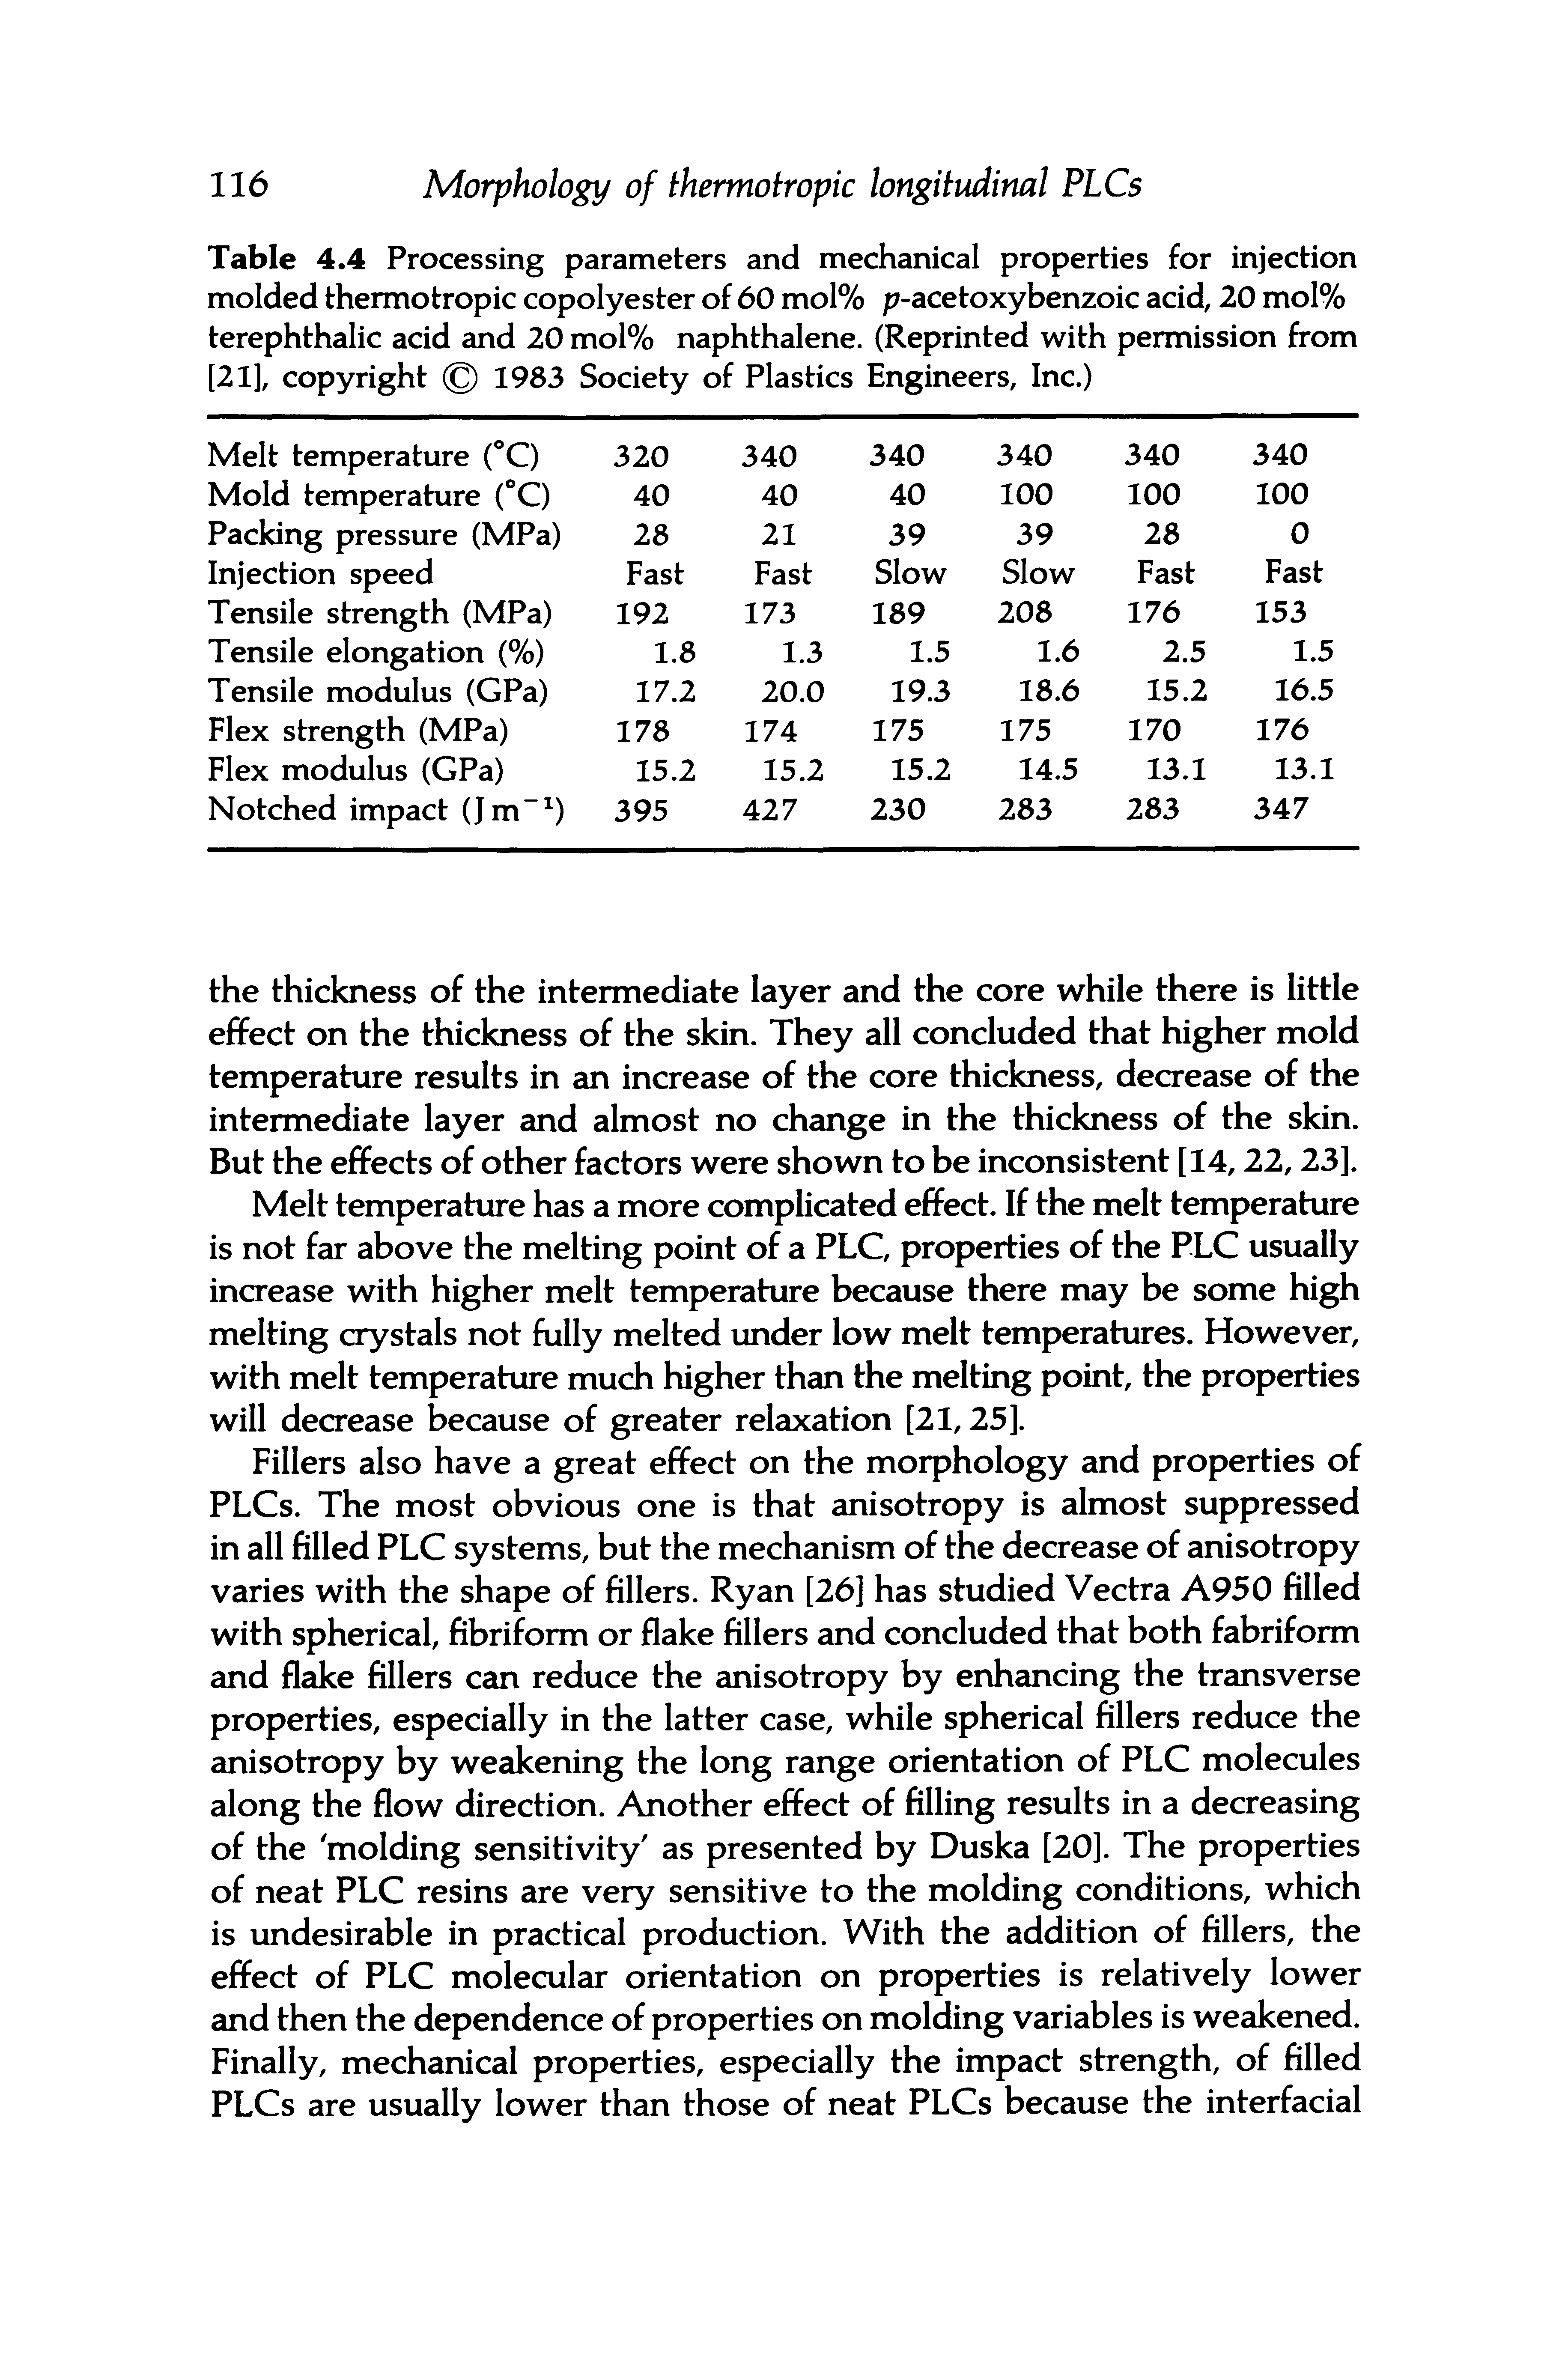 Table 4.4 Processing parameters and mechanical properties for injection molded thermotropic copolyester of 60 mol% p-acetoxybenzoic acid, 20 mol% terephthalic acid and 20 mol% naphthalene. (Reprinted with permission from [21], copyright 1983 Society of Plastics Engineers, Inc.)...